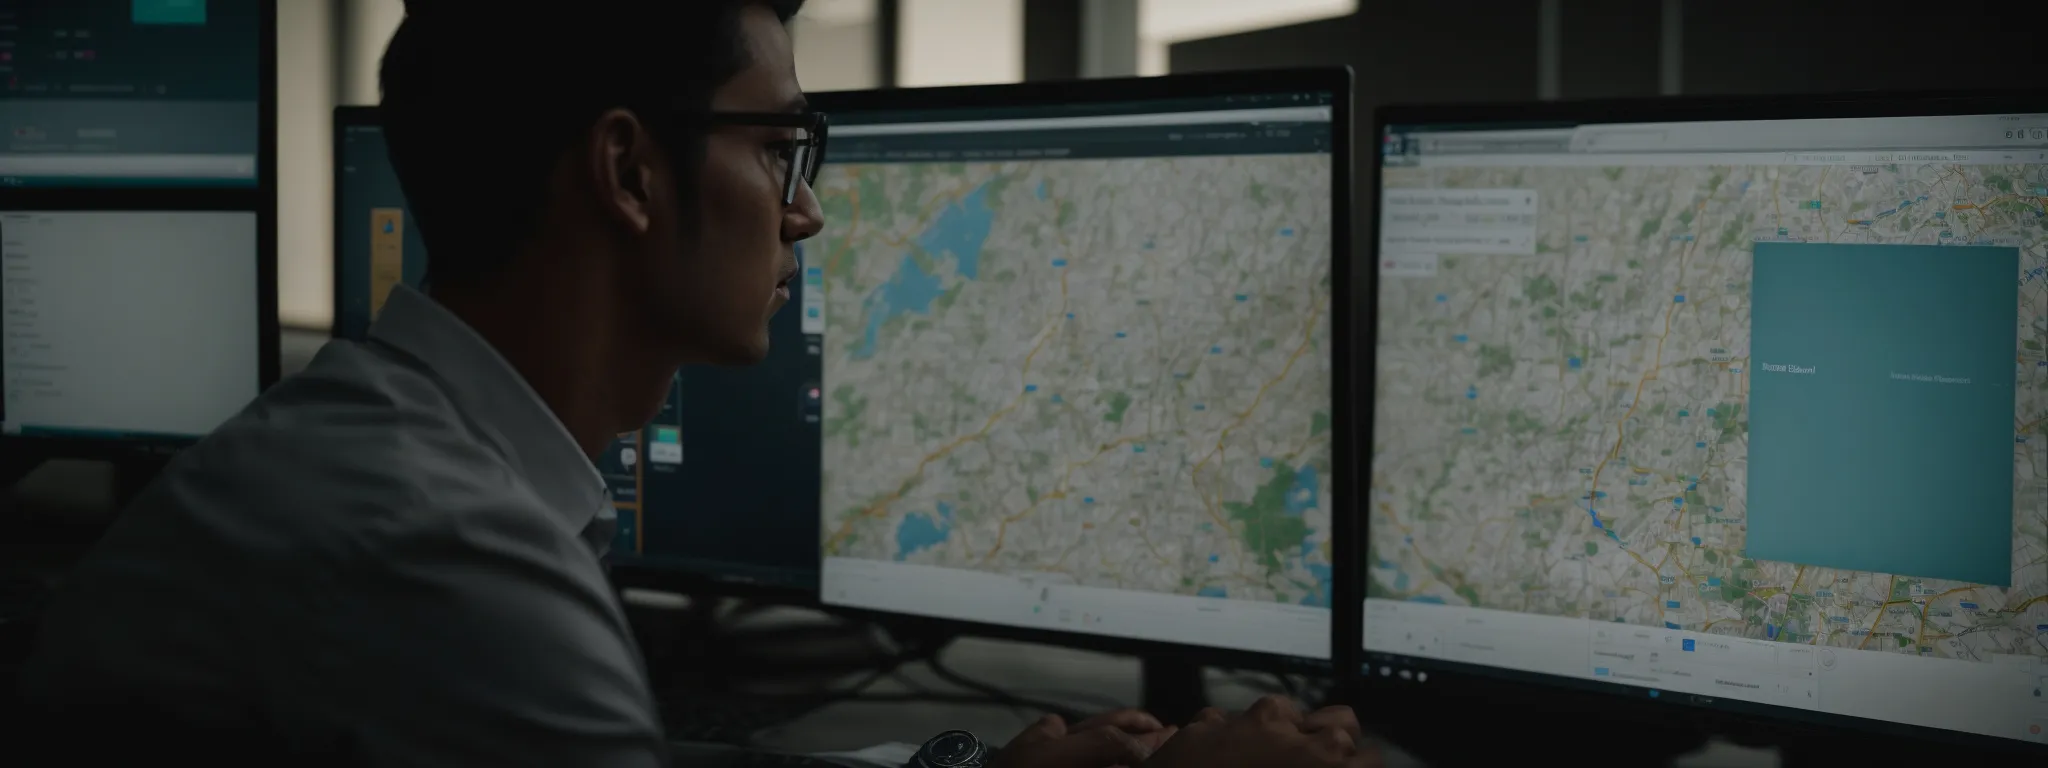 a marketing professional reviews analytics on a computer, highlighting maps and location data.